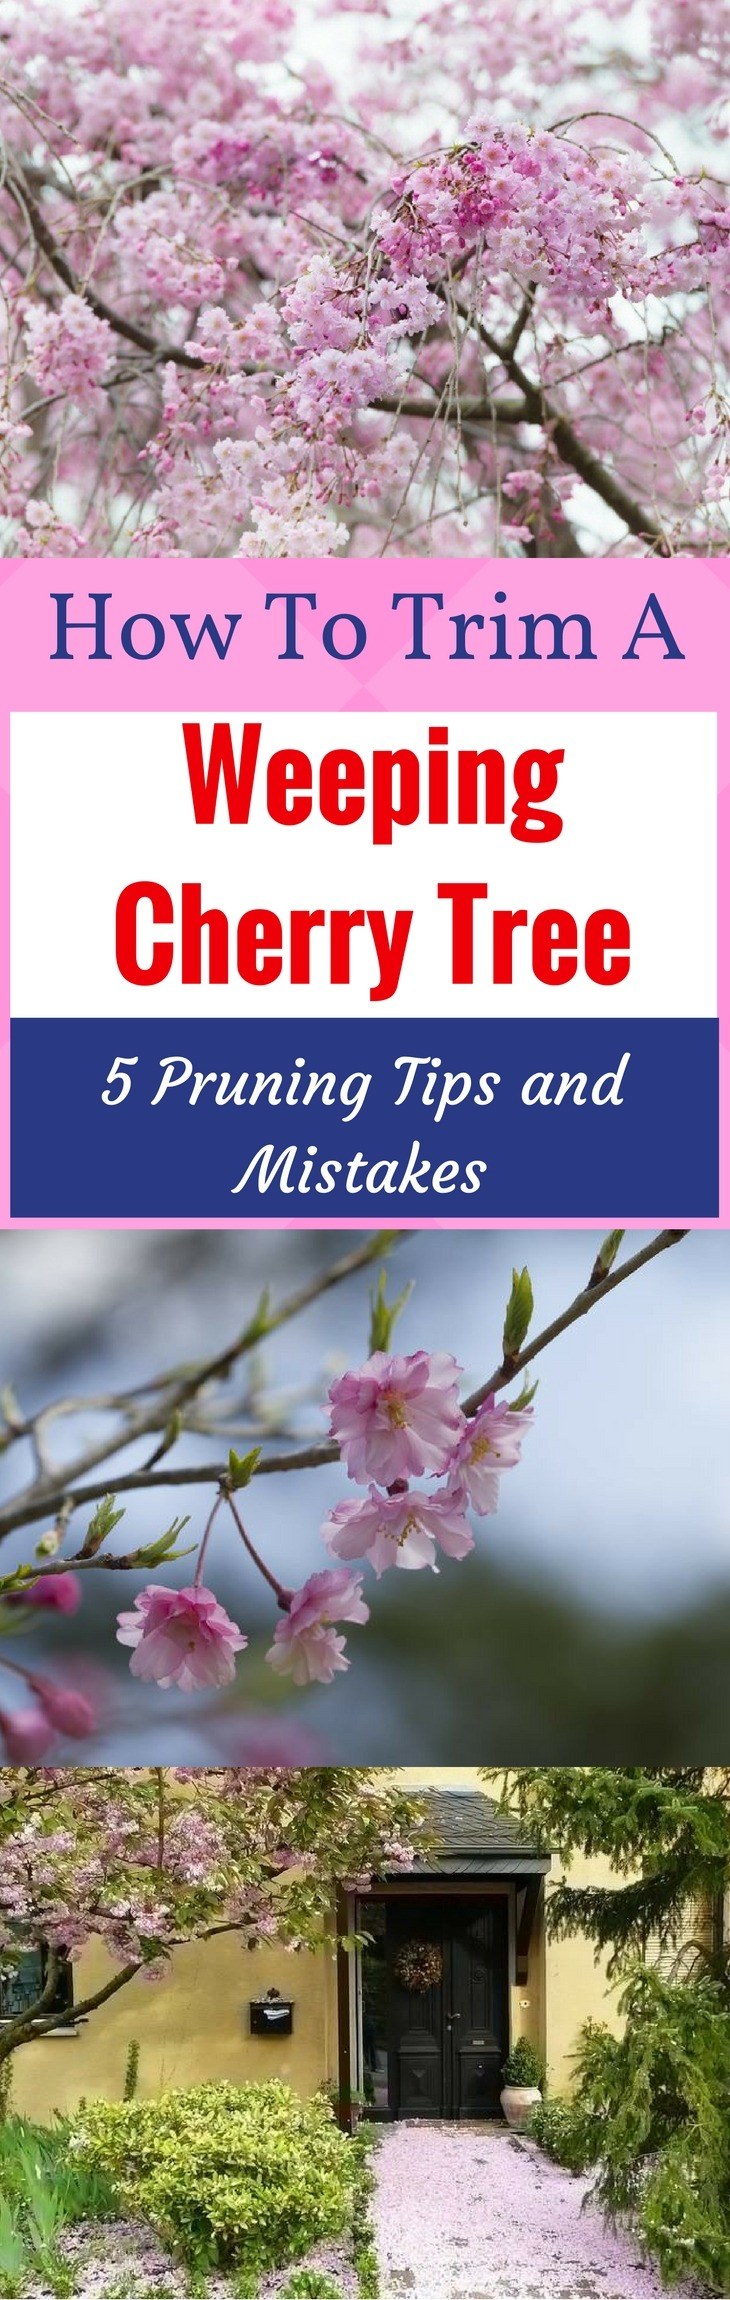 How to Trim a Weeping Cherry Tree: 5 Pruning Tips and Mistakes that You Should Know